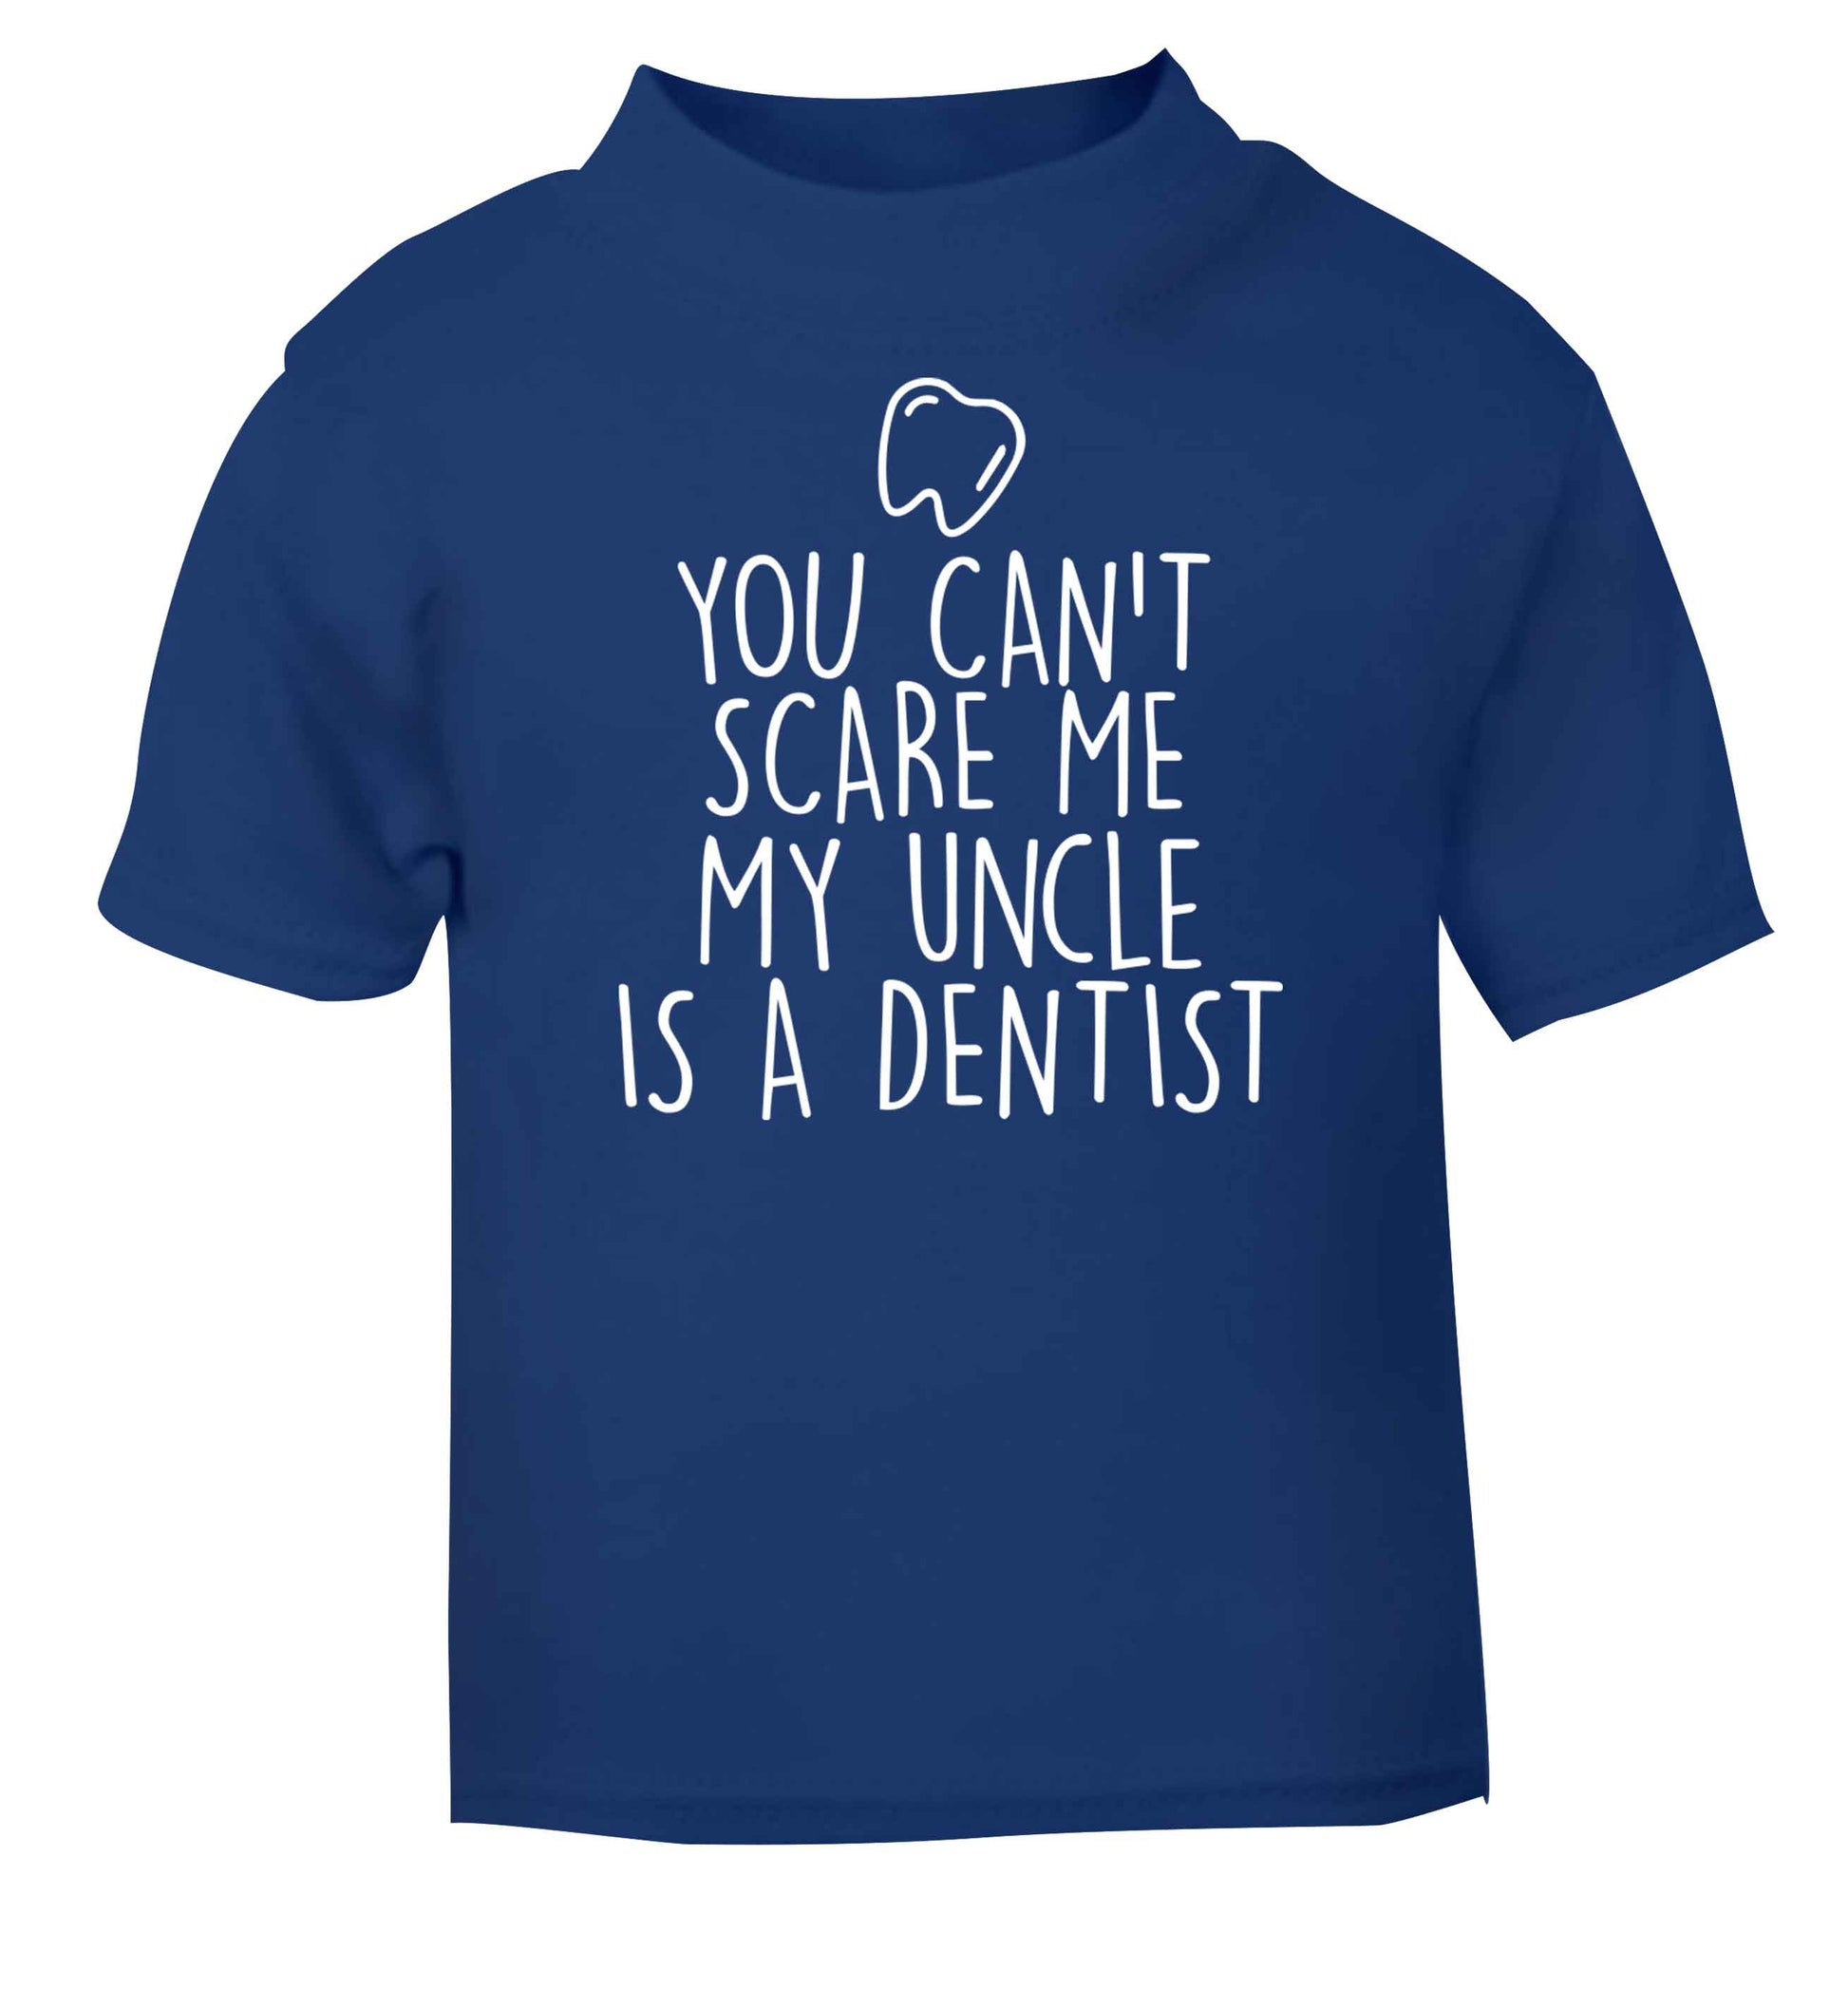 You can't scare me my uncle is a dentist blue baby toddler Tshirt 2 Years